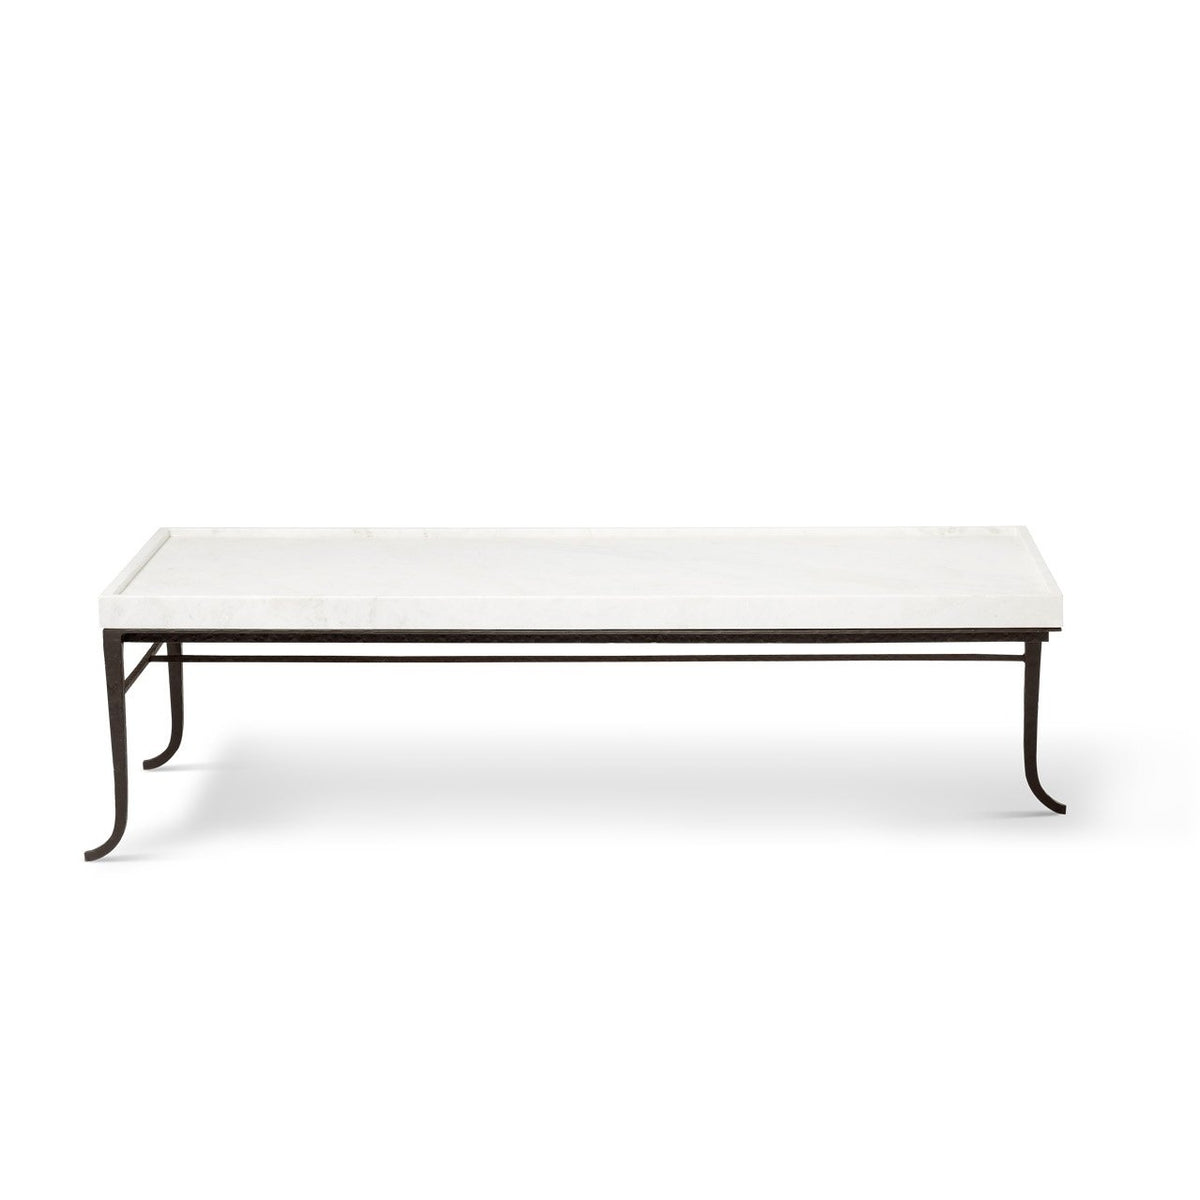 Kerylos Marble and Iron Coffee Table